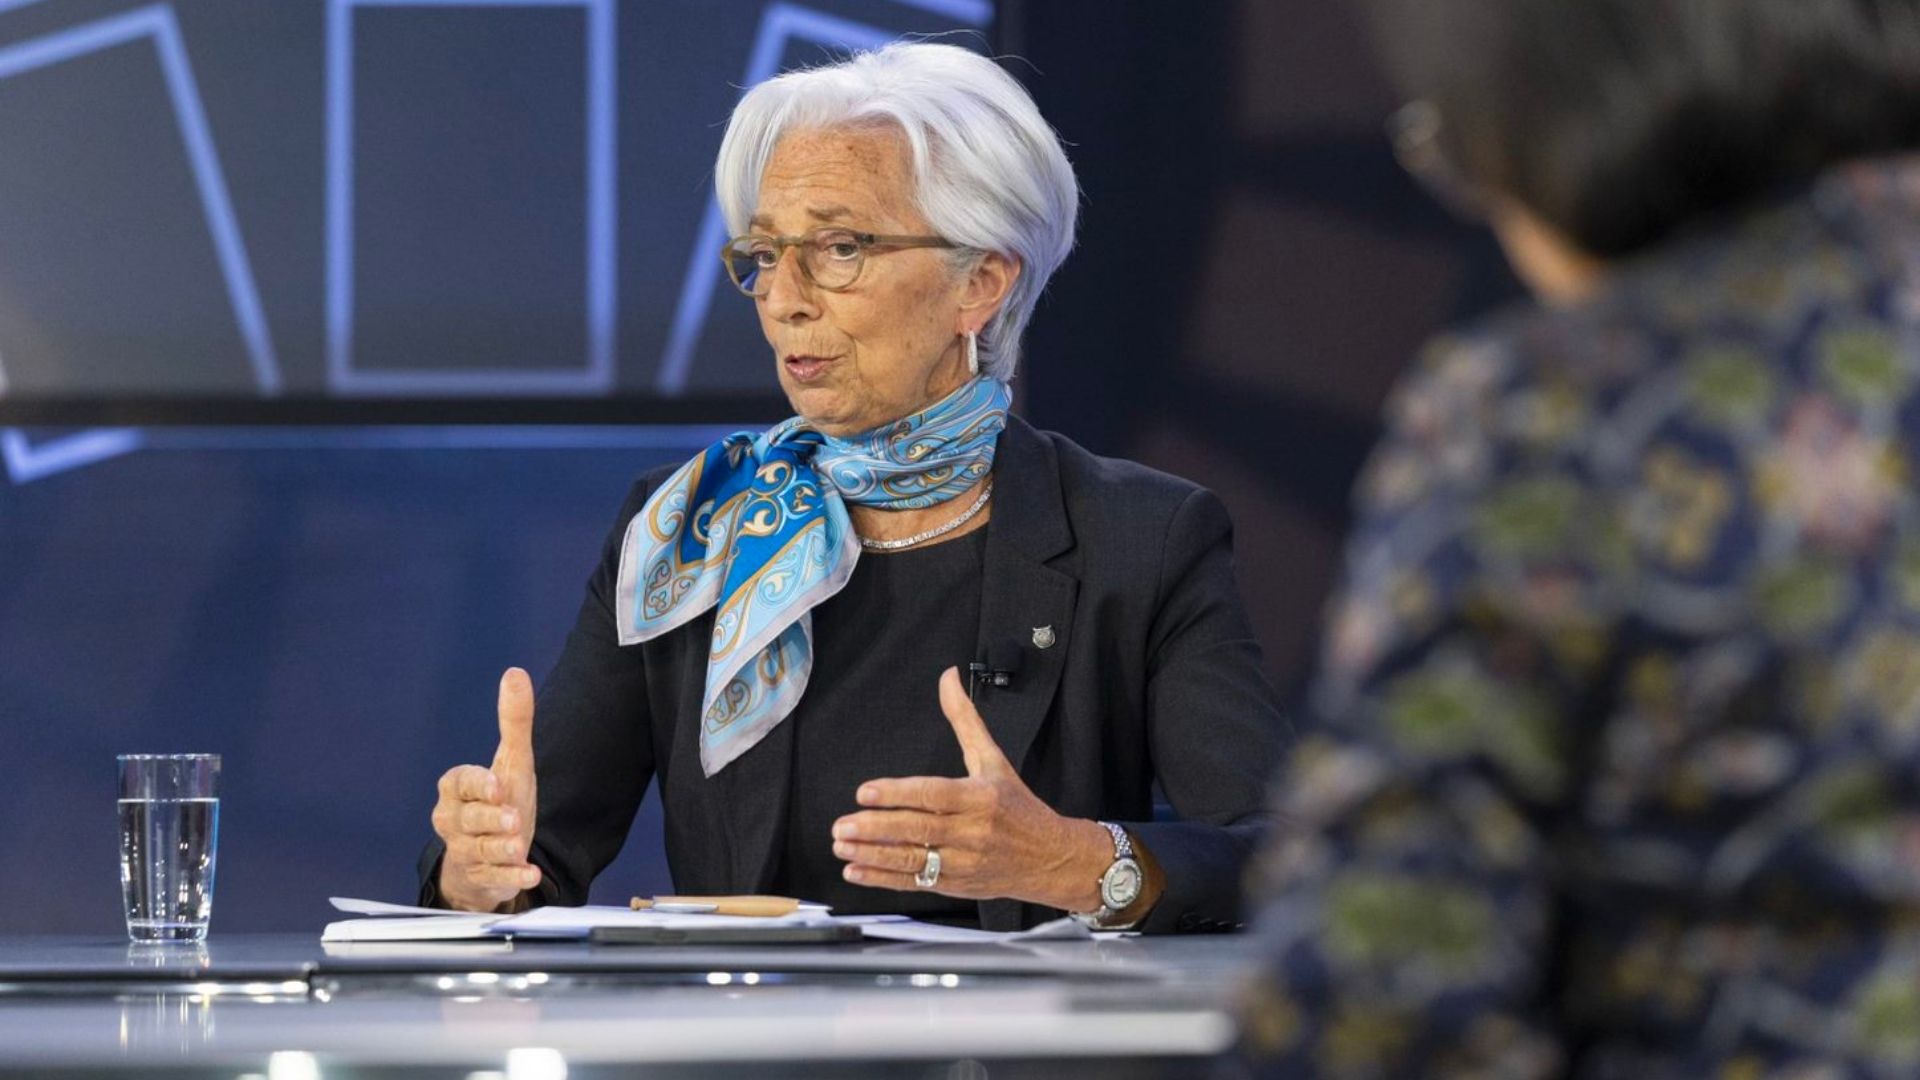 Lagarde at the debate on the global economy